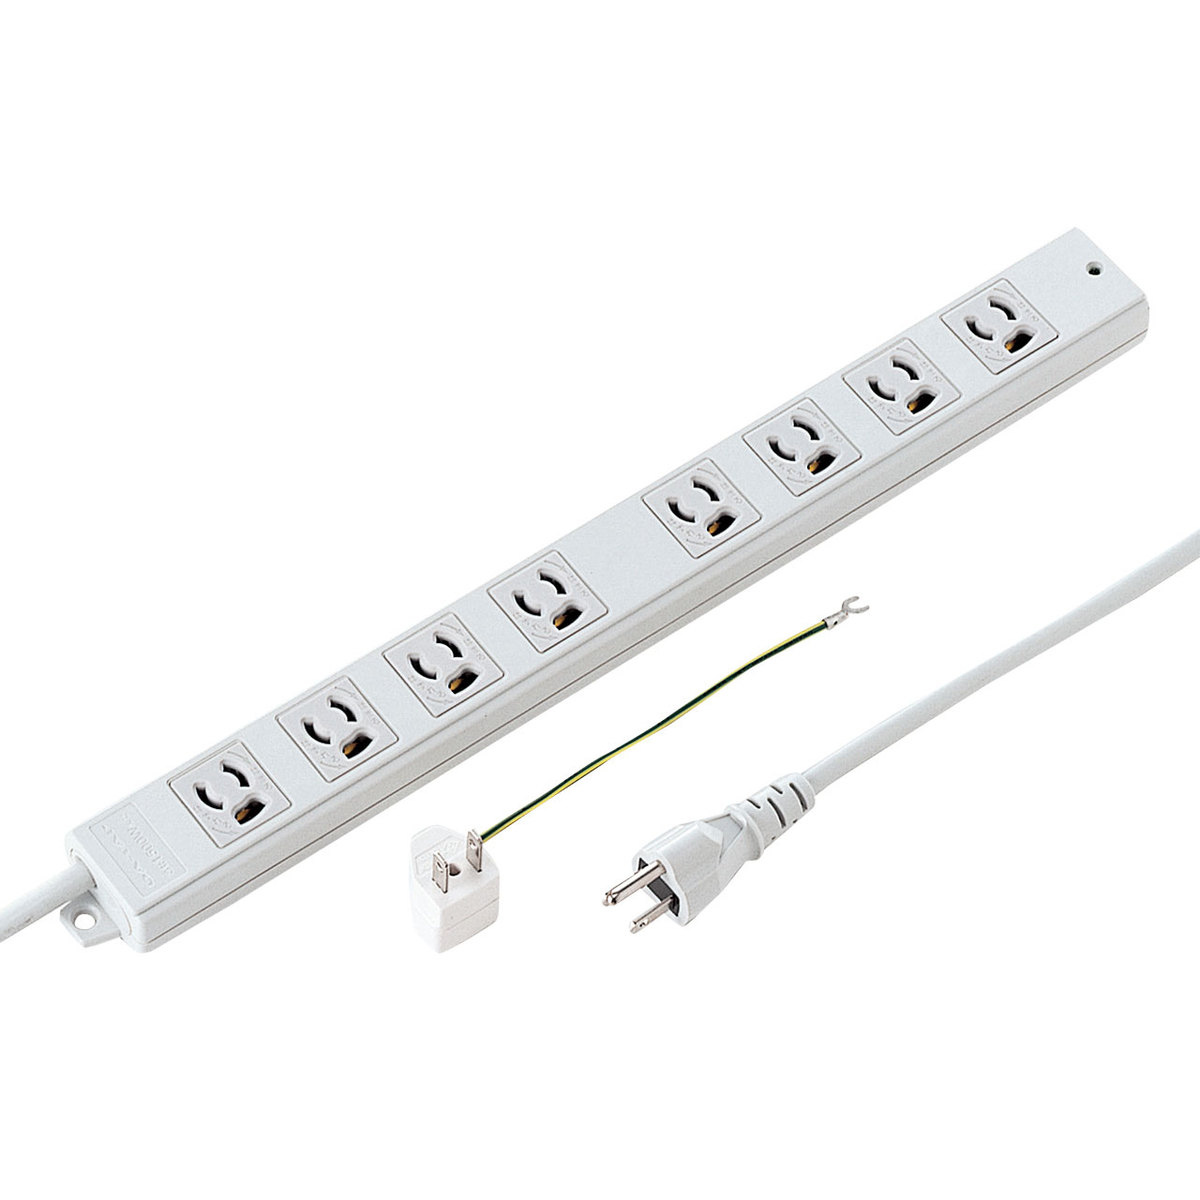 8-Outlet Removal Prevention Type Power Strip (Line Type Basic Model) 